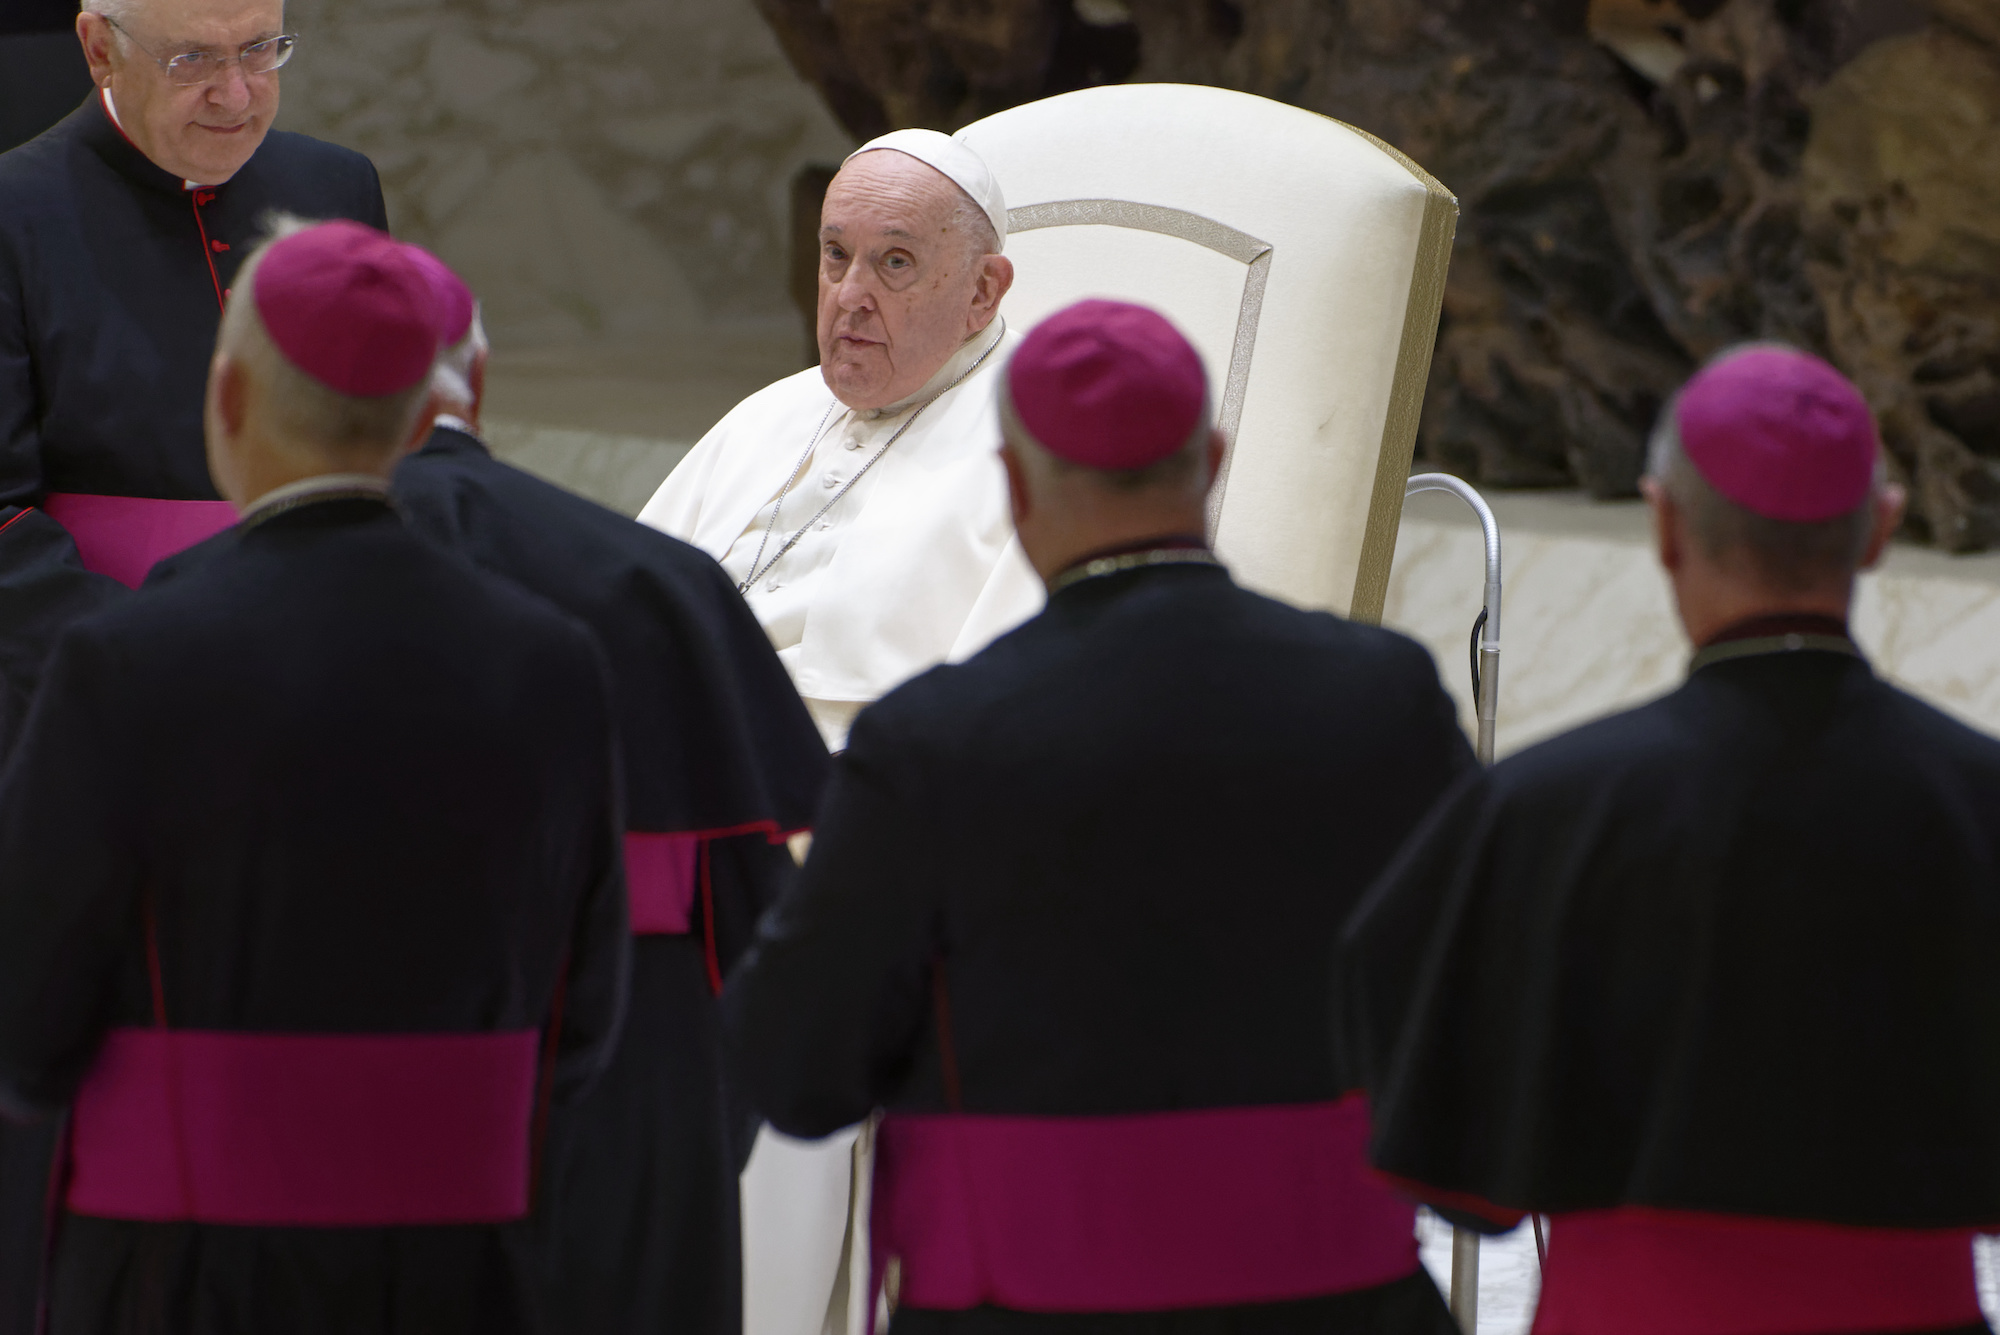 Pope Francis is surrounded by bishops at the end of his weekly general audience at the Vatican on November 29.